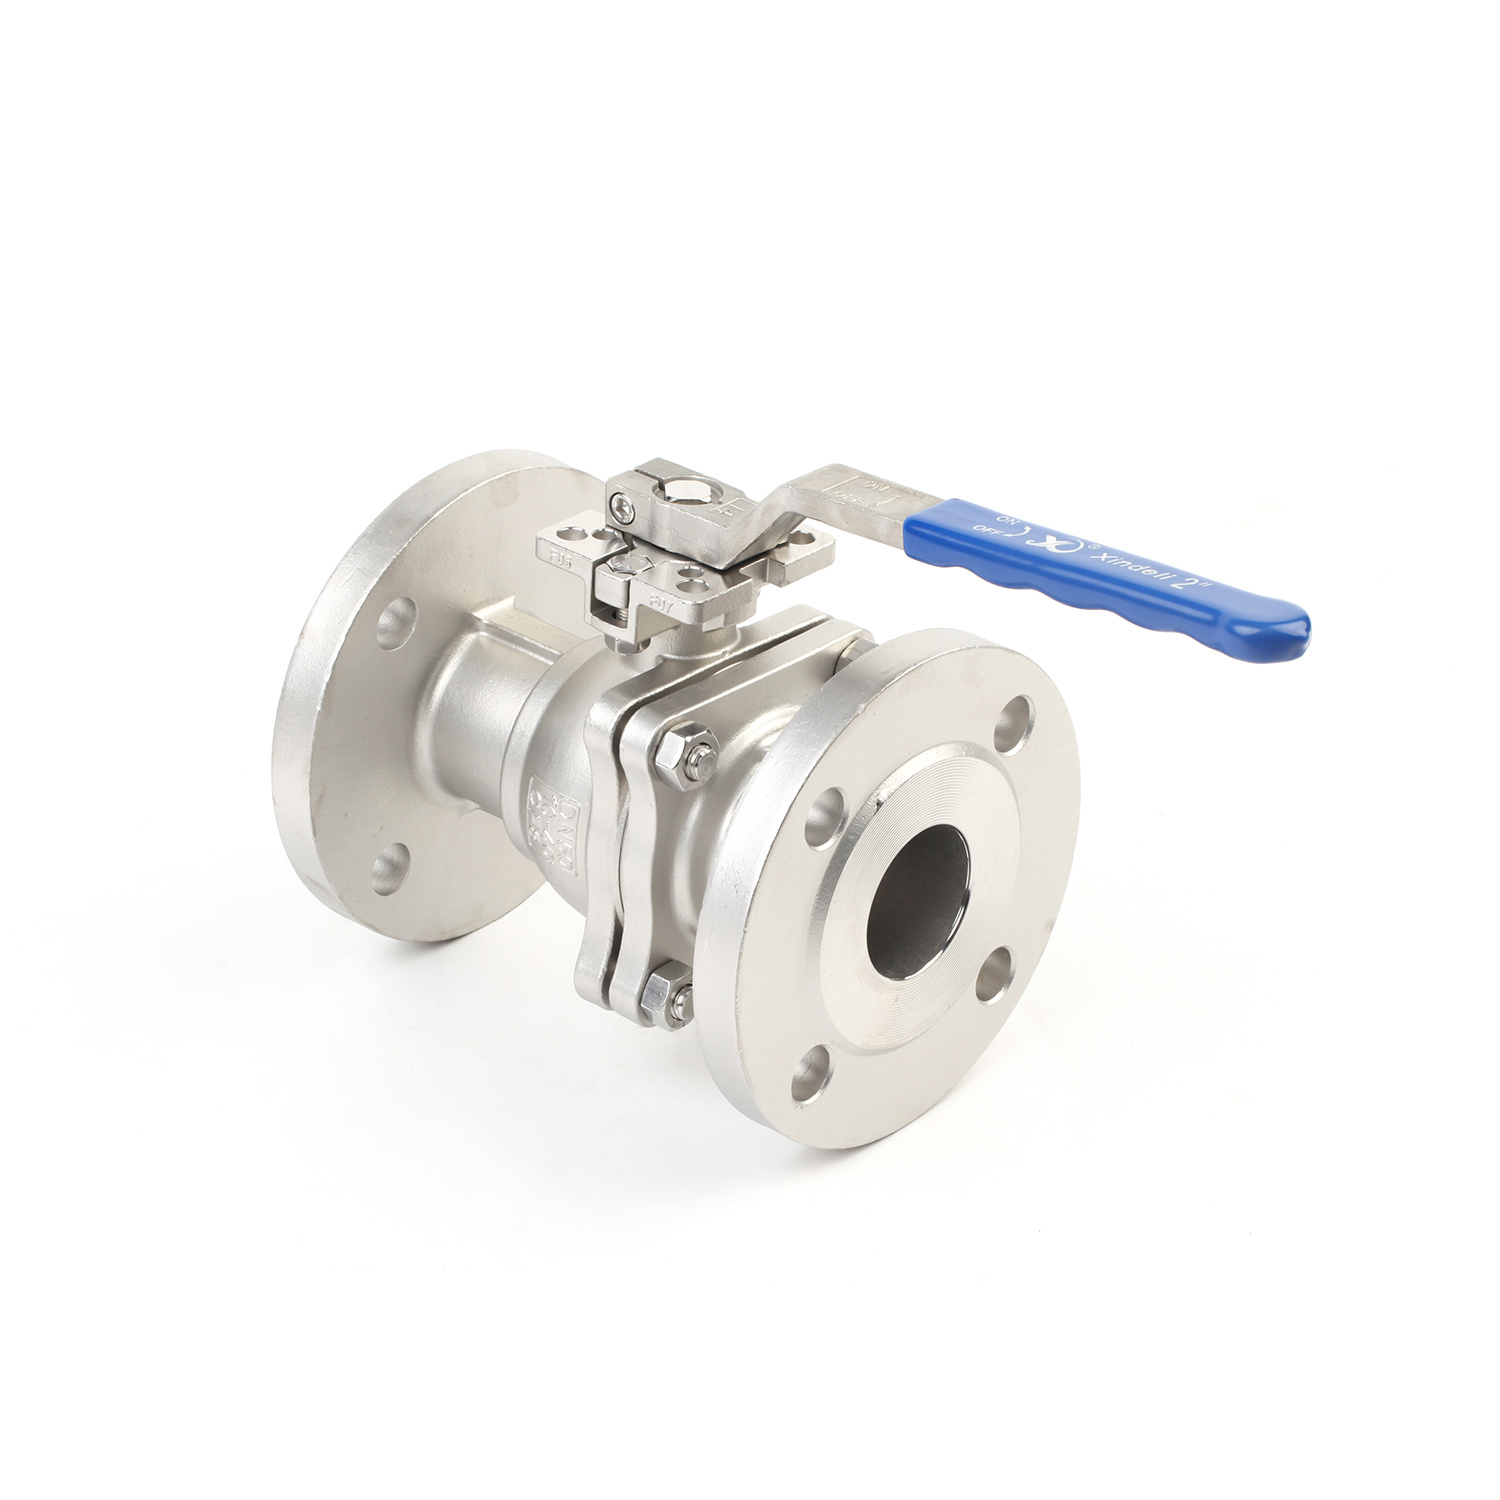 STAINLESS STEEL VALVE MANUFACTURERS